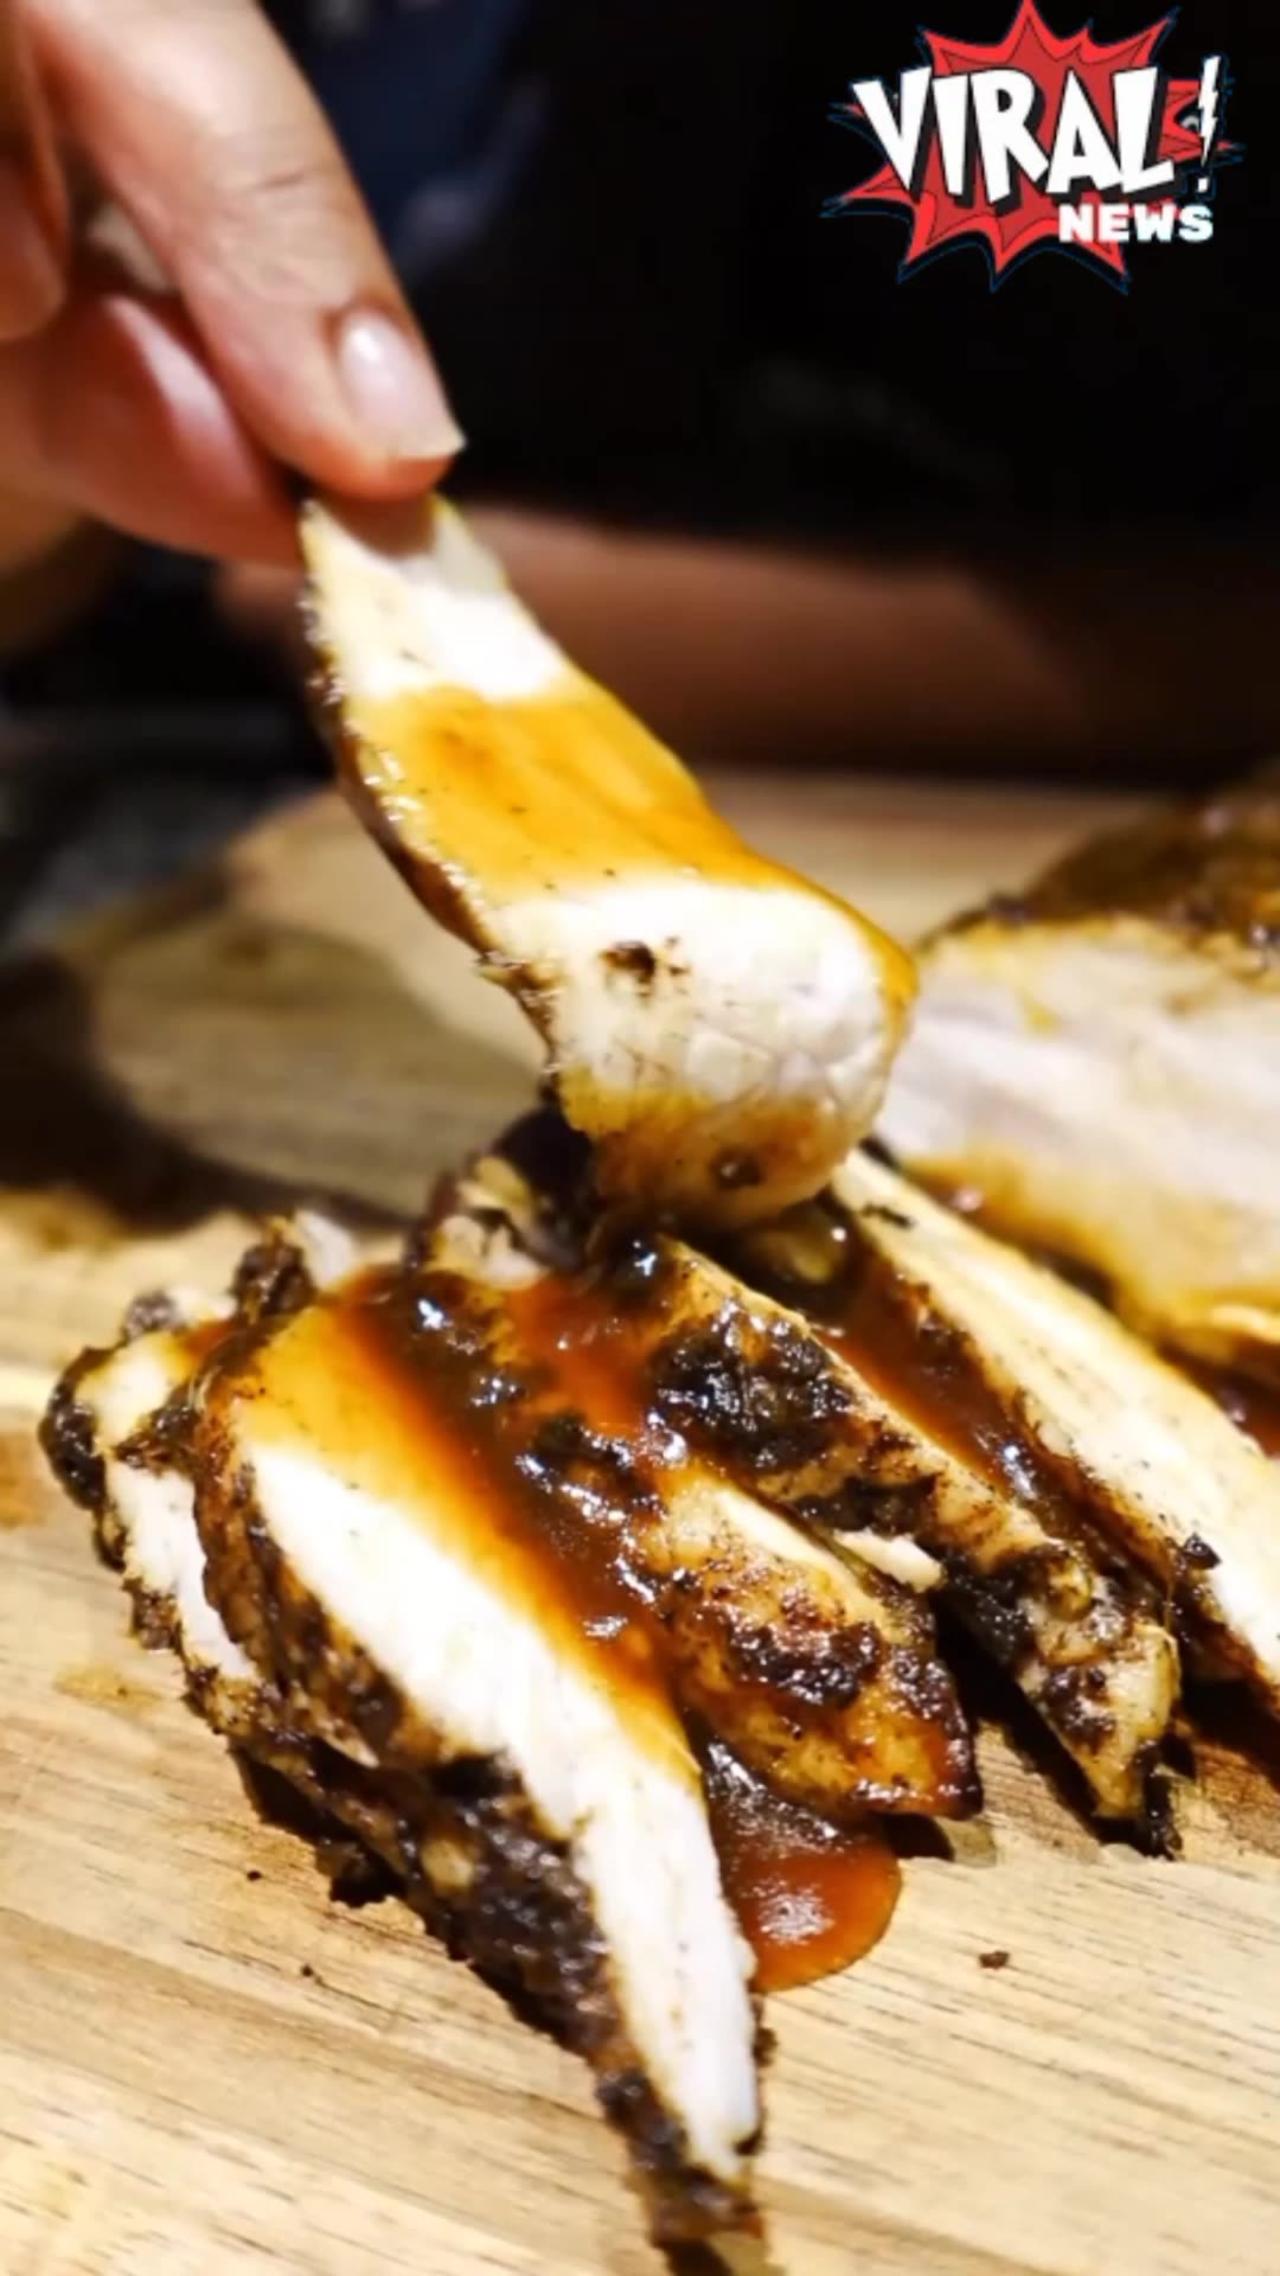 Avid foodie unlocks a saucy new way to spice up Thanksgiving steaks